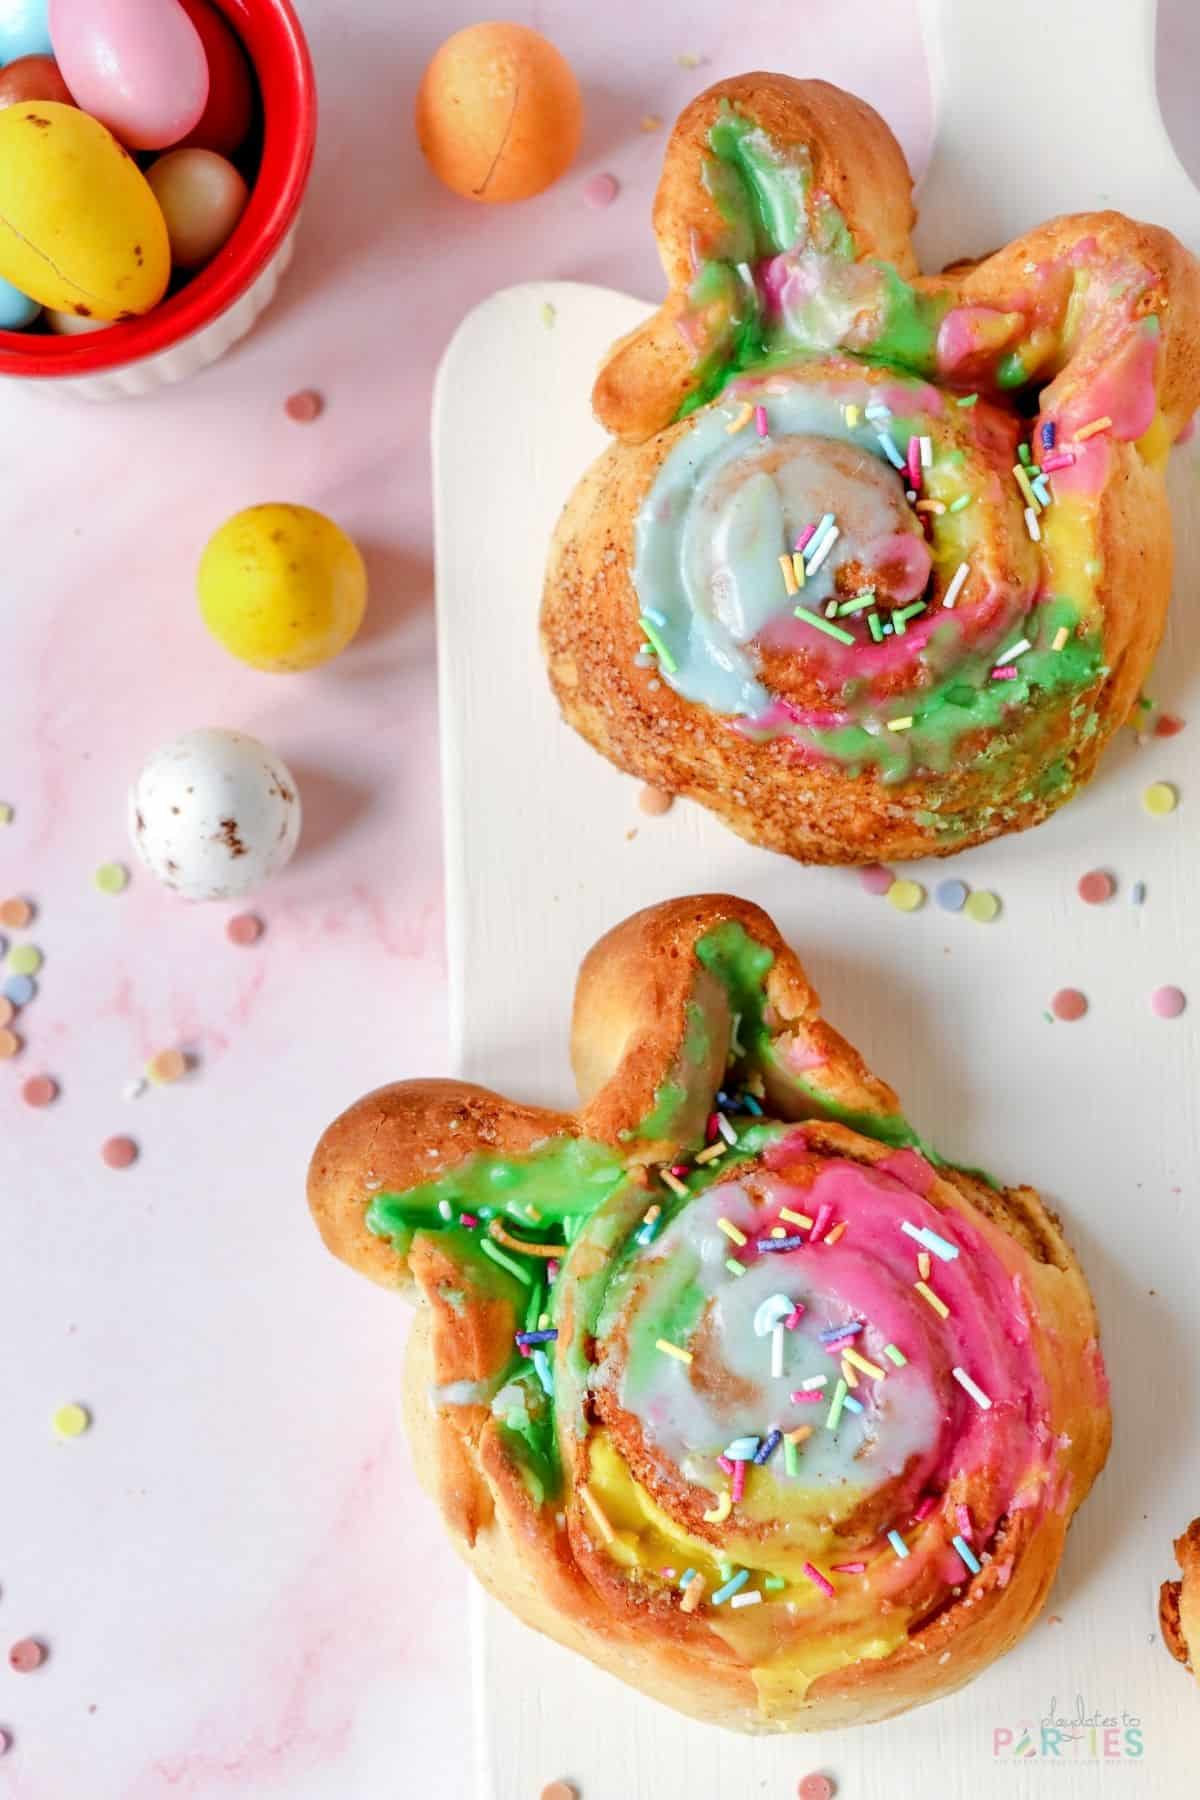 Bunny shaped cinnamon rolls with colorful icing and sprinkles on a cutting board.